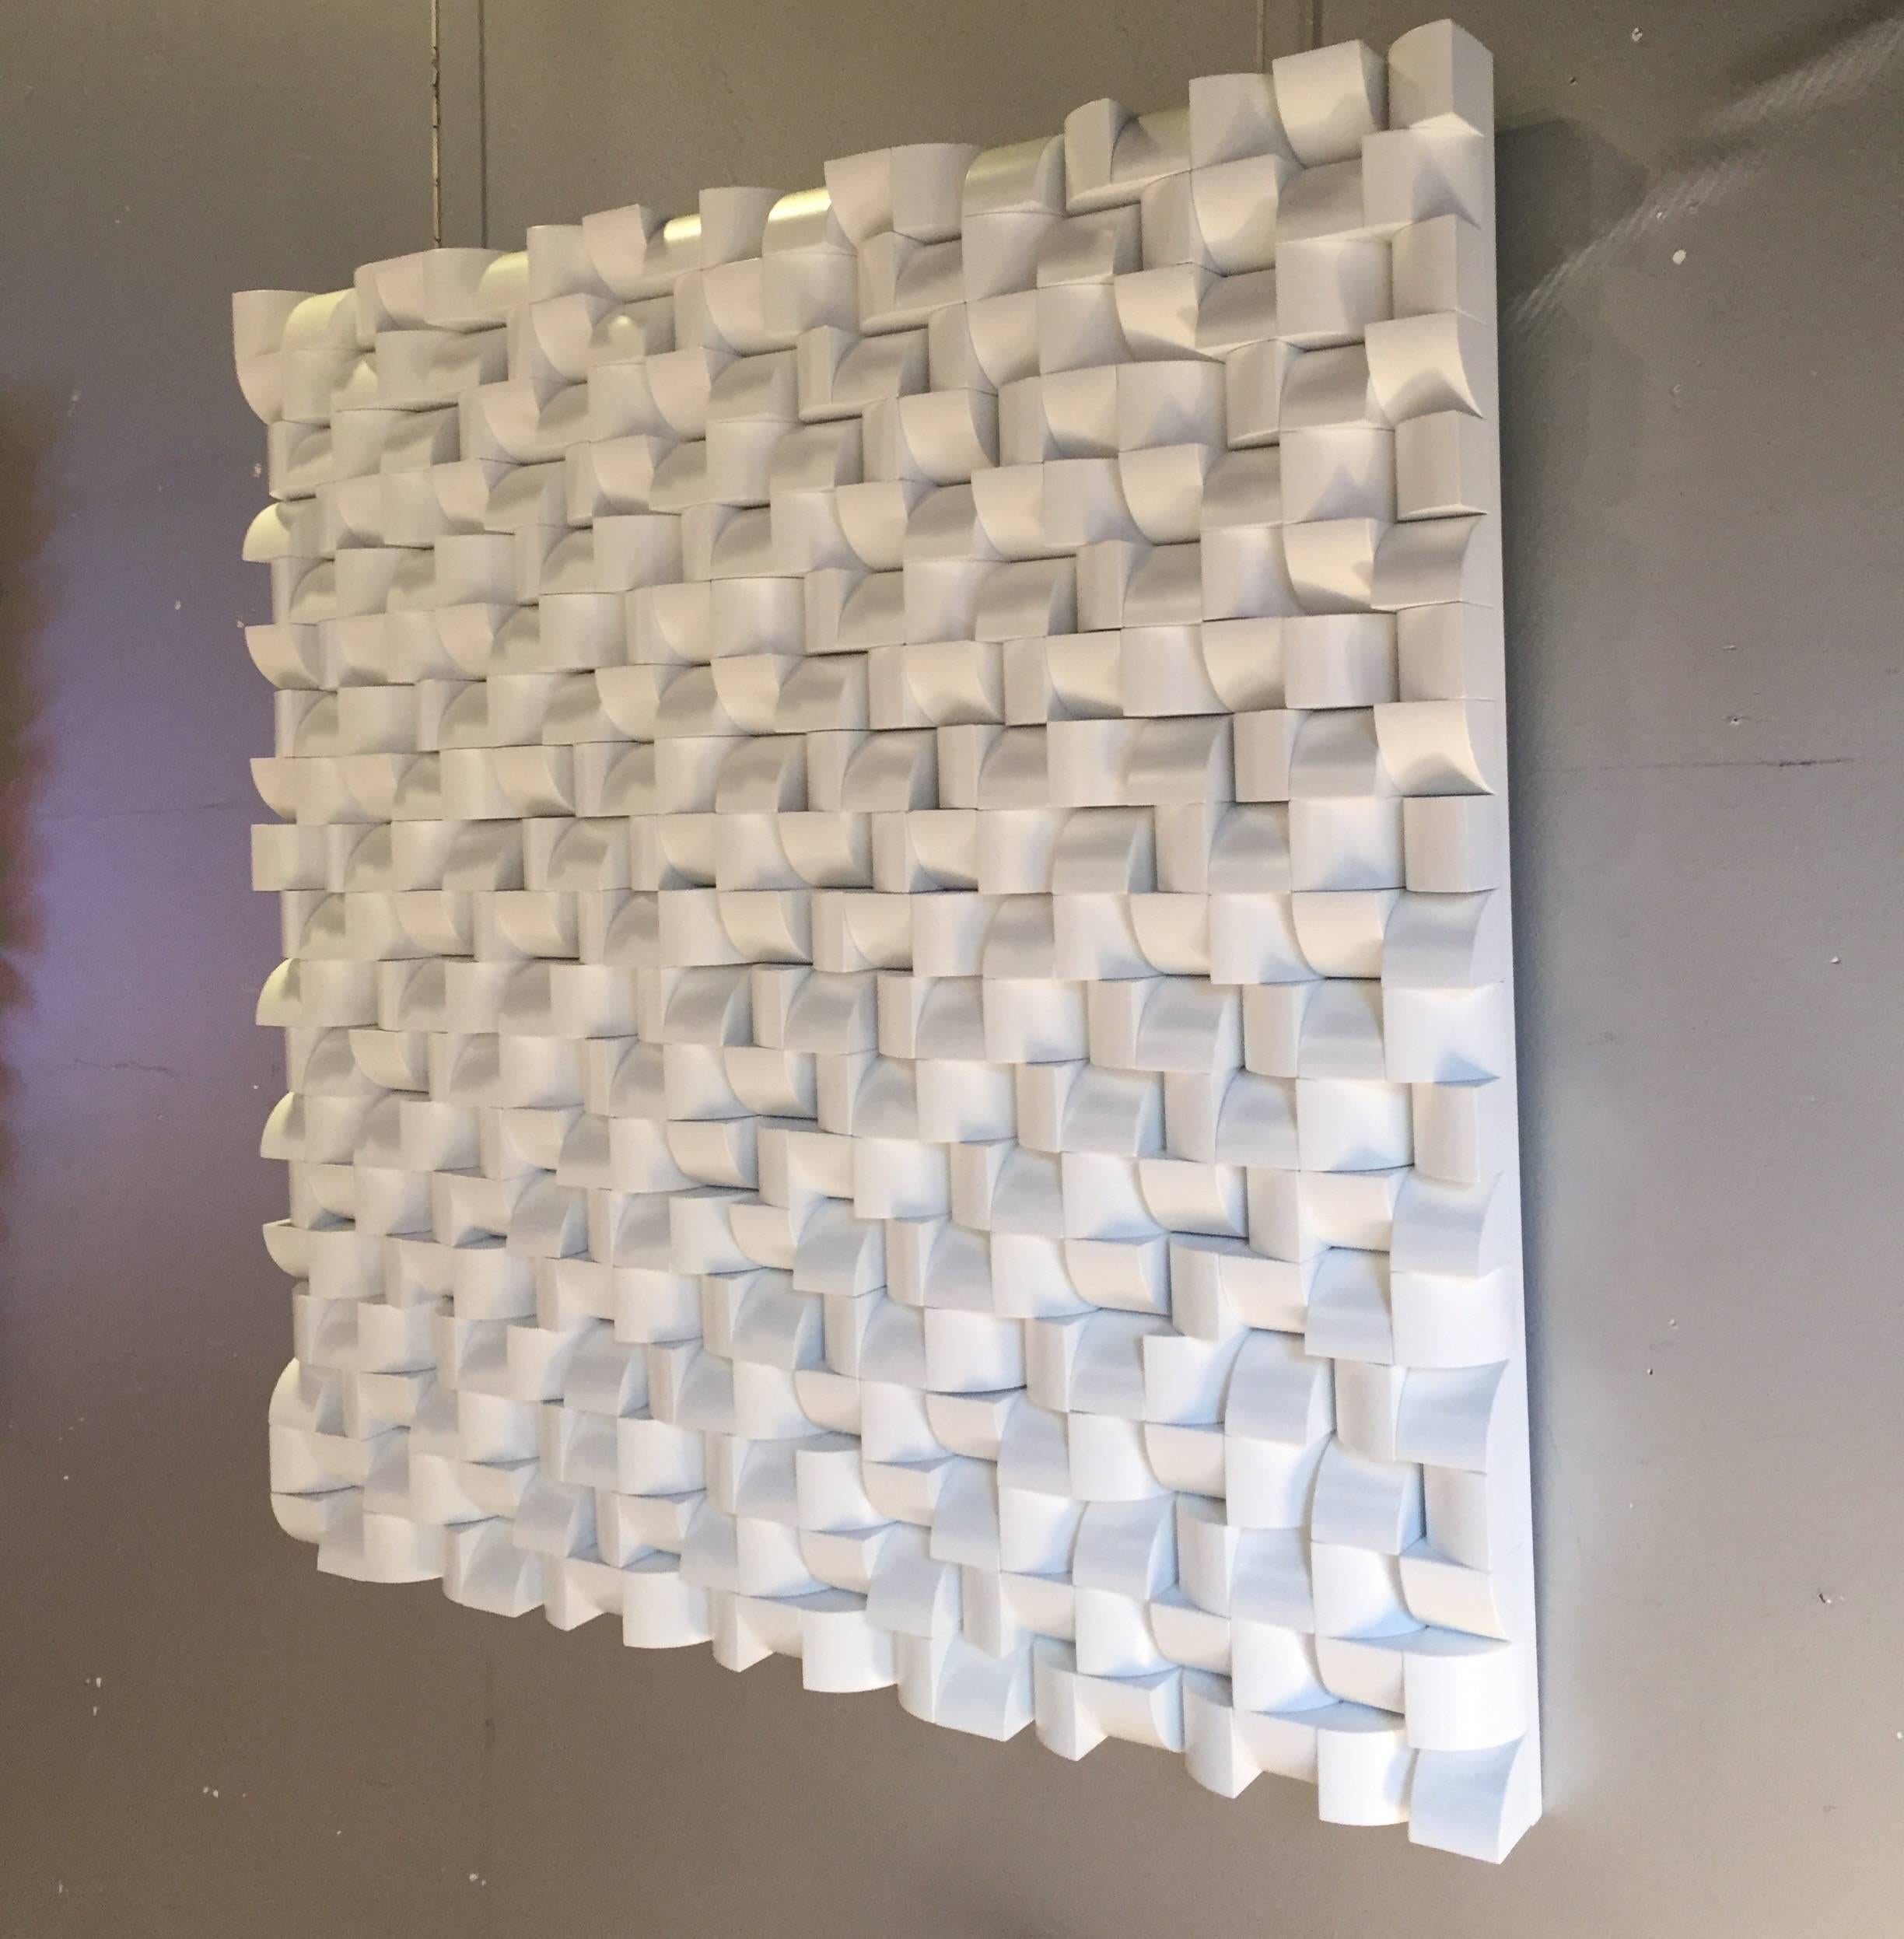 Large white lacquered wood abstract wall sculpture by Hempe.